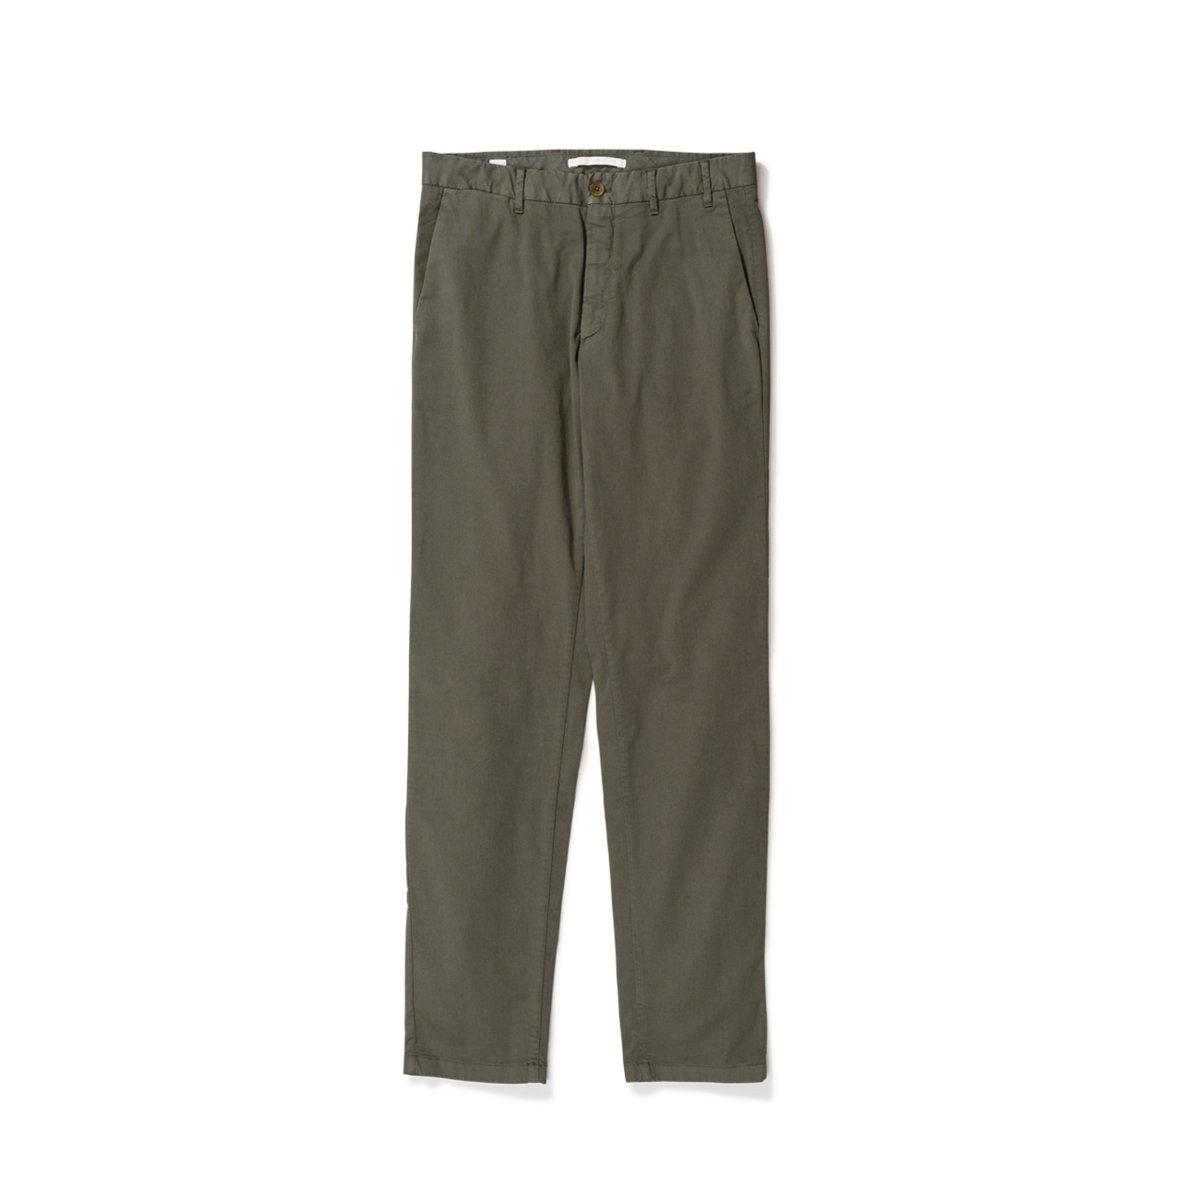 Norse Projects Aros Light Twill Pants (Olive)  - Allike Store